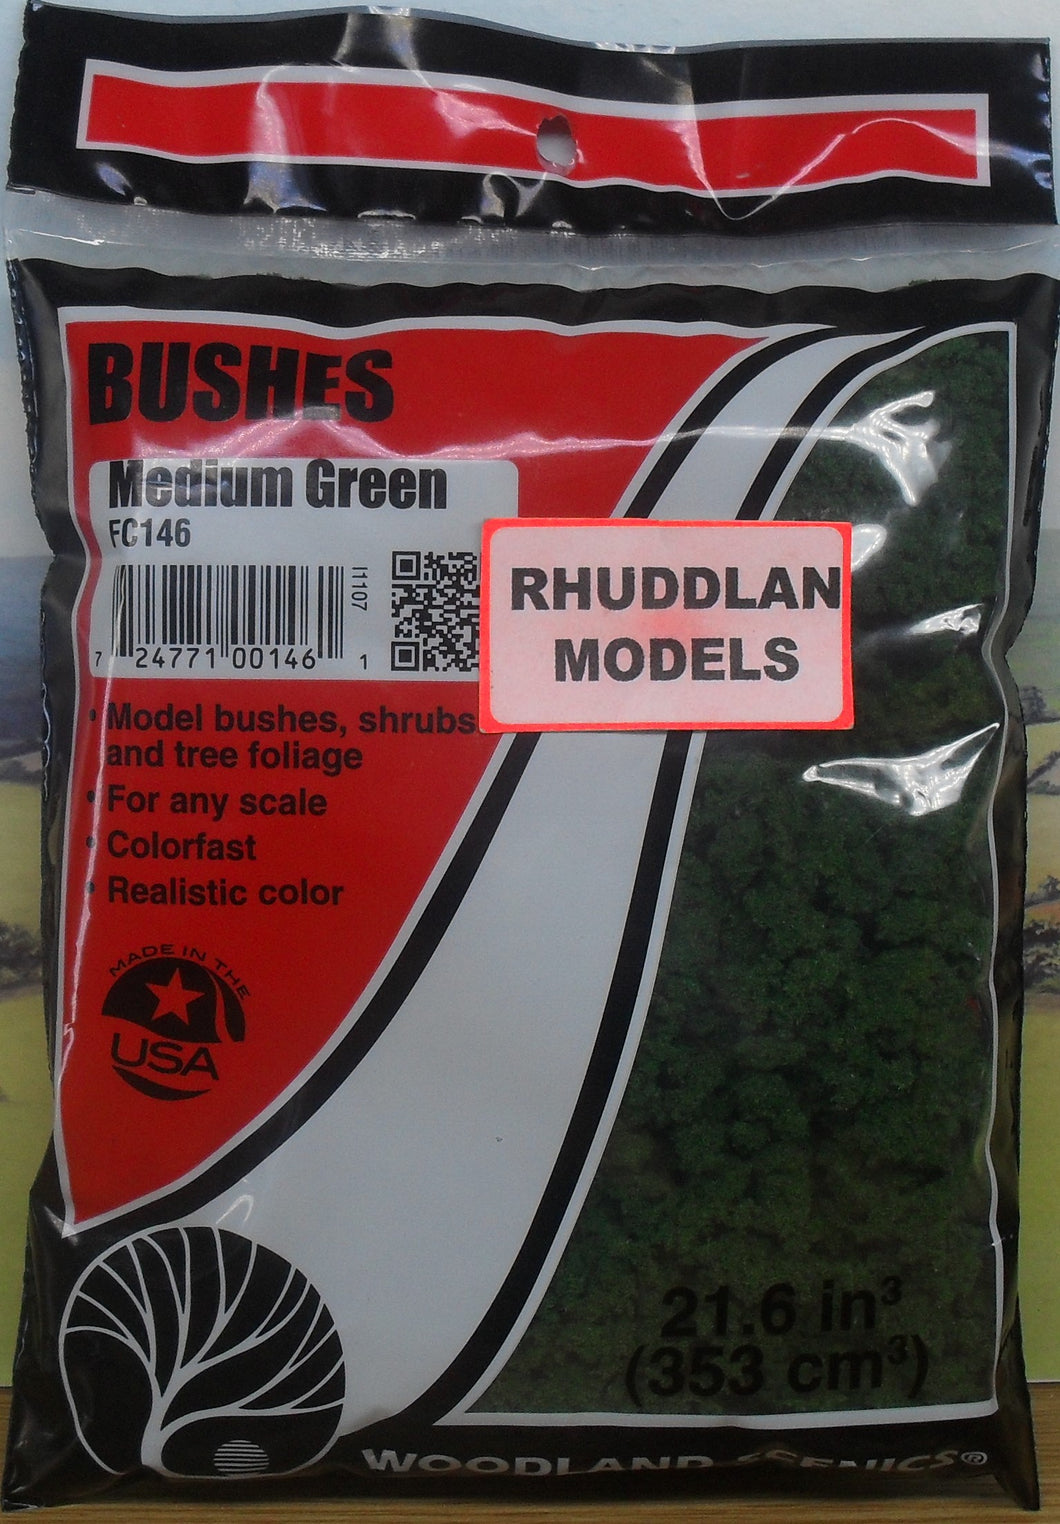 WOODLAND SCENICS BUSHES FC146 MEDIUM GREEN - (PRICE INCLUDES DELIVERY)